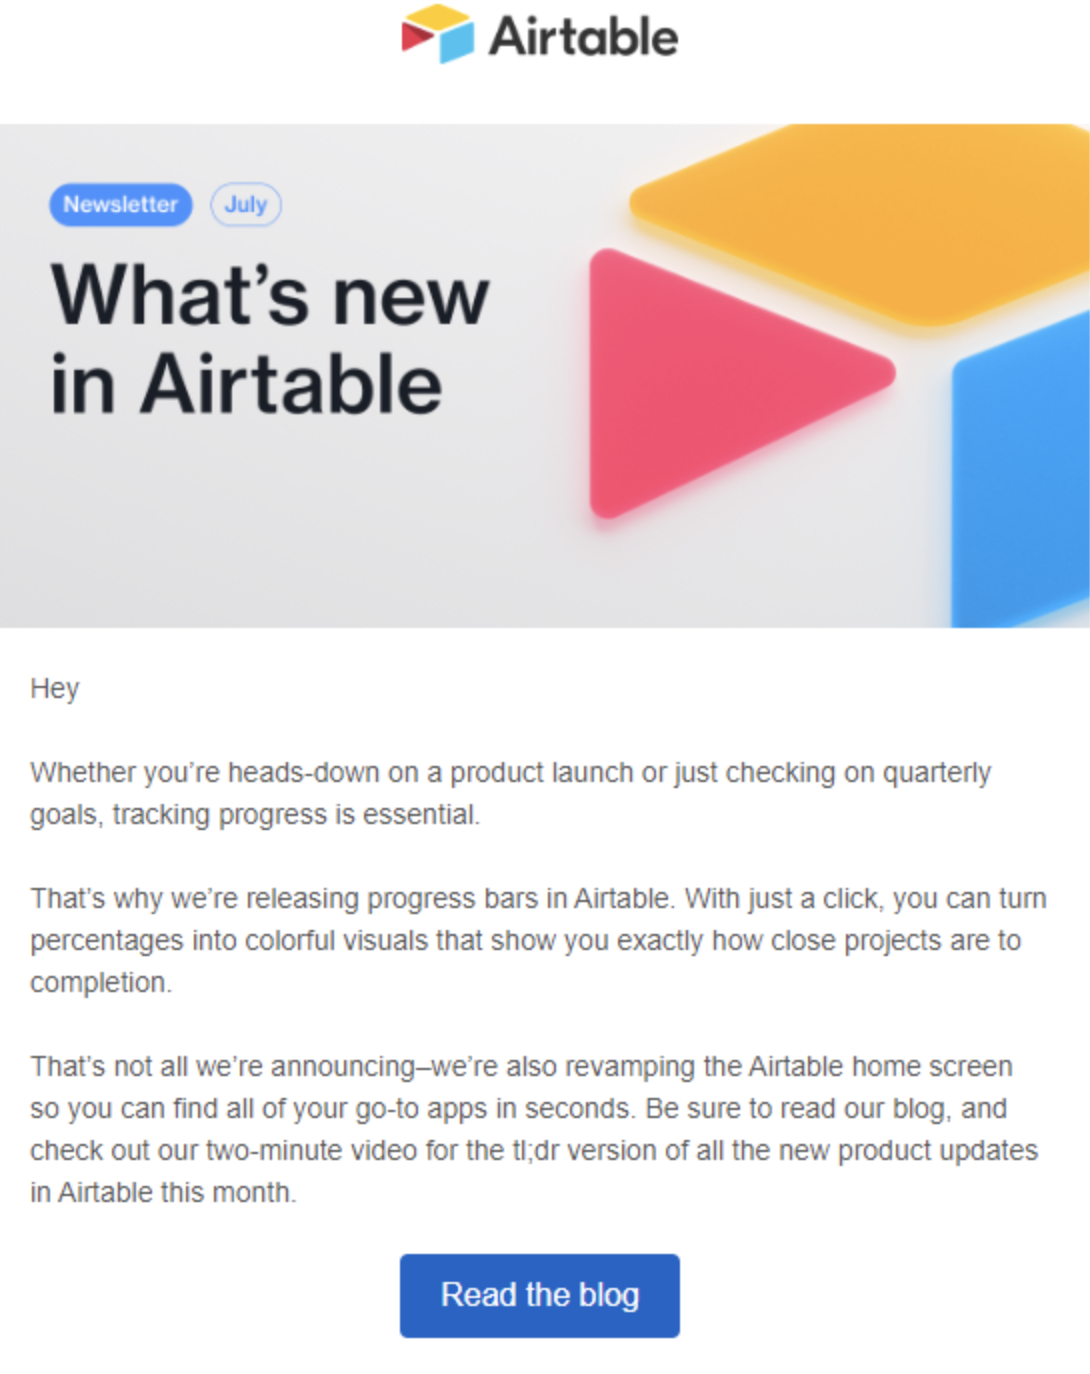 airtable b2b email marketing example